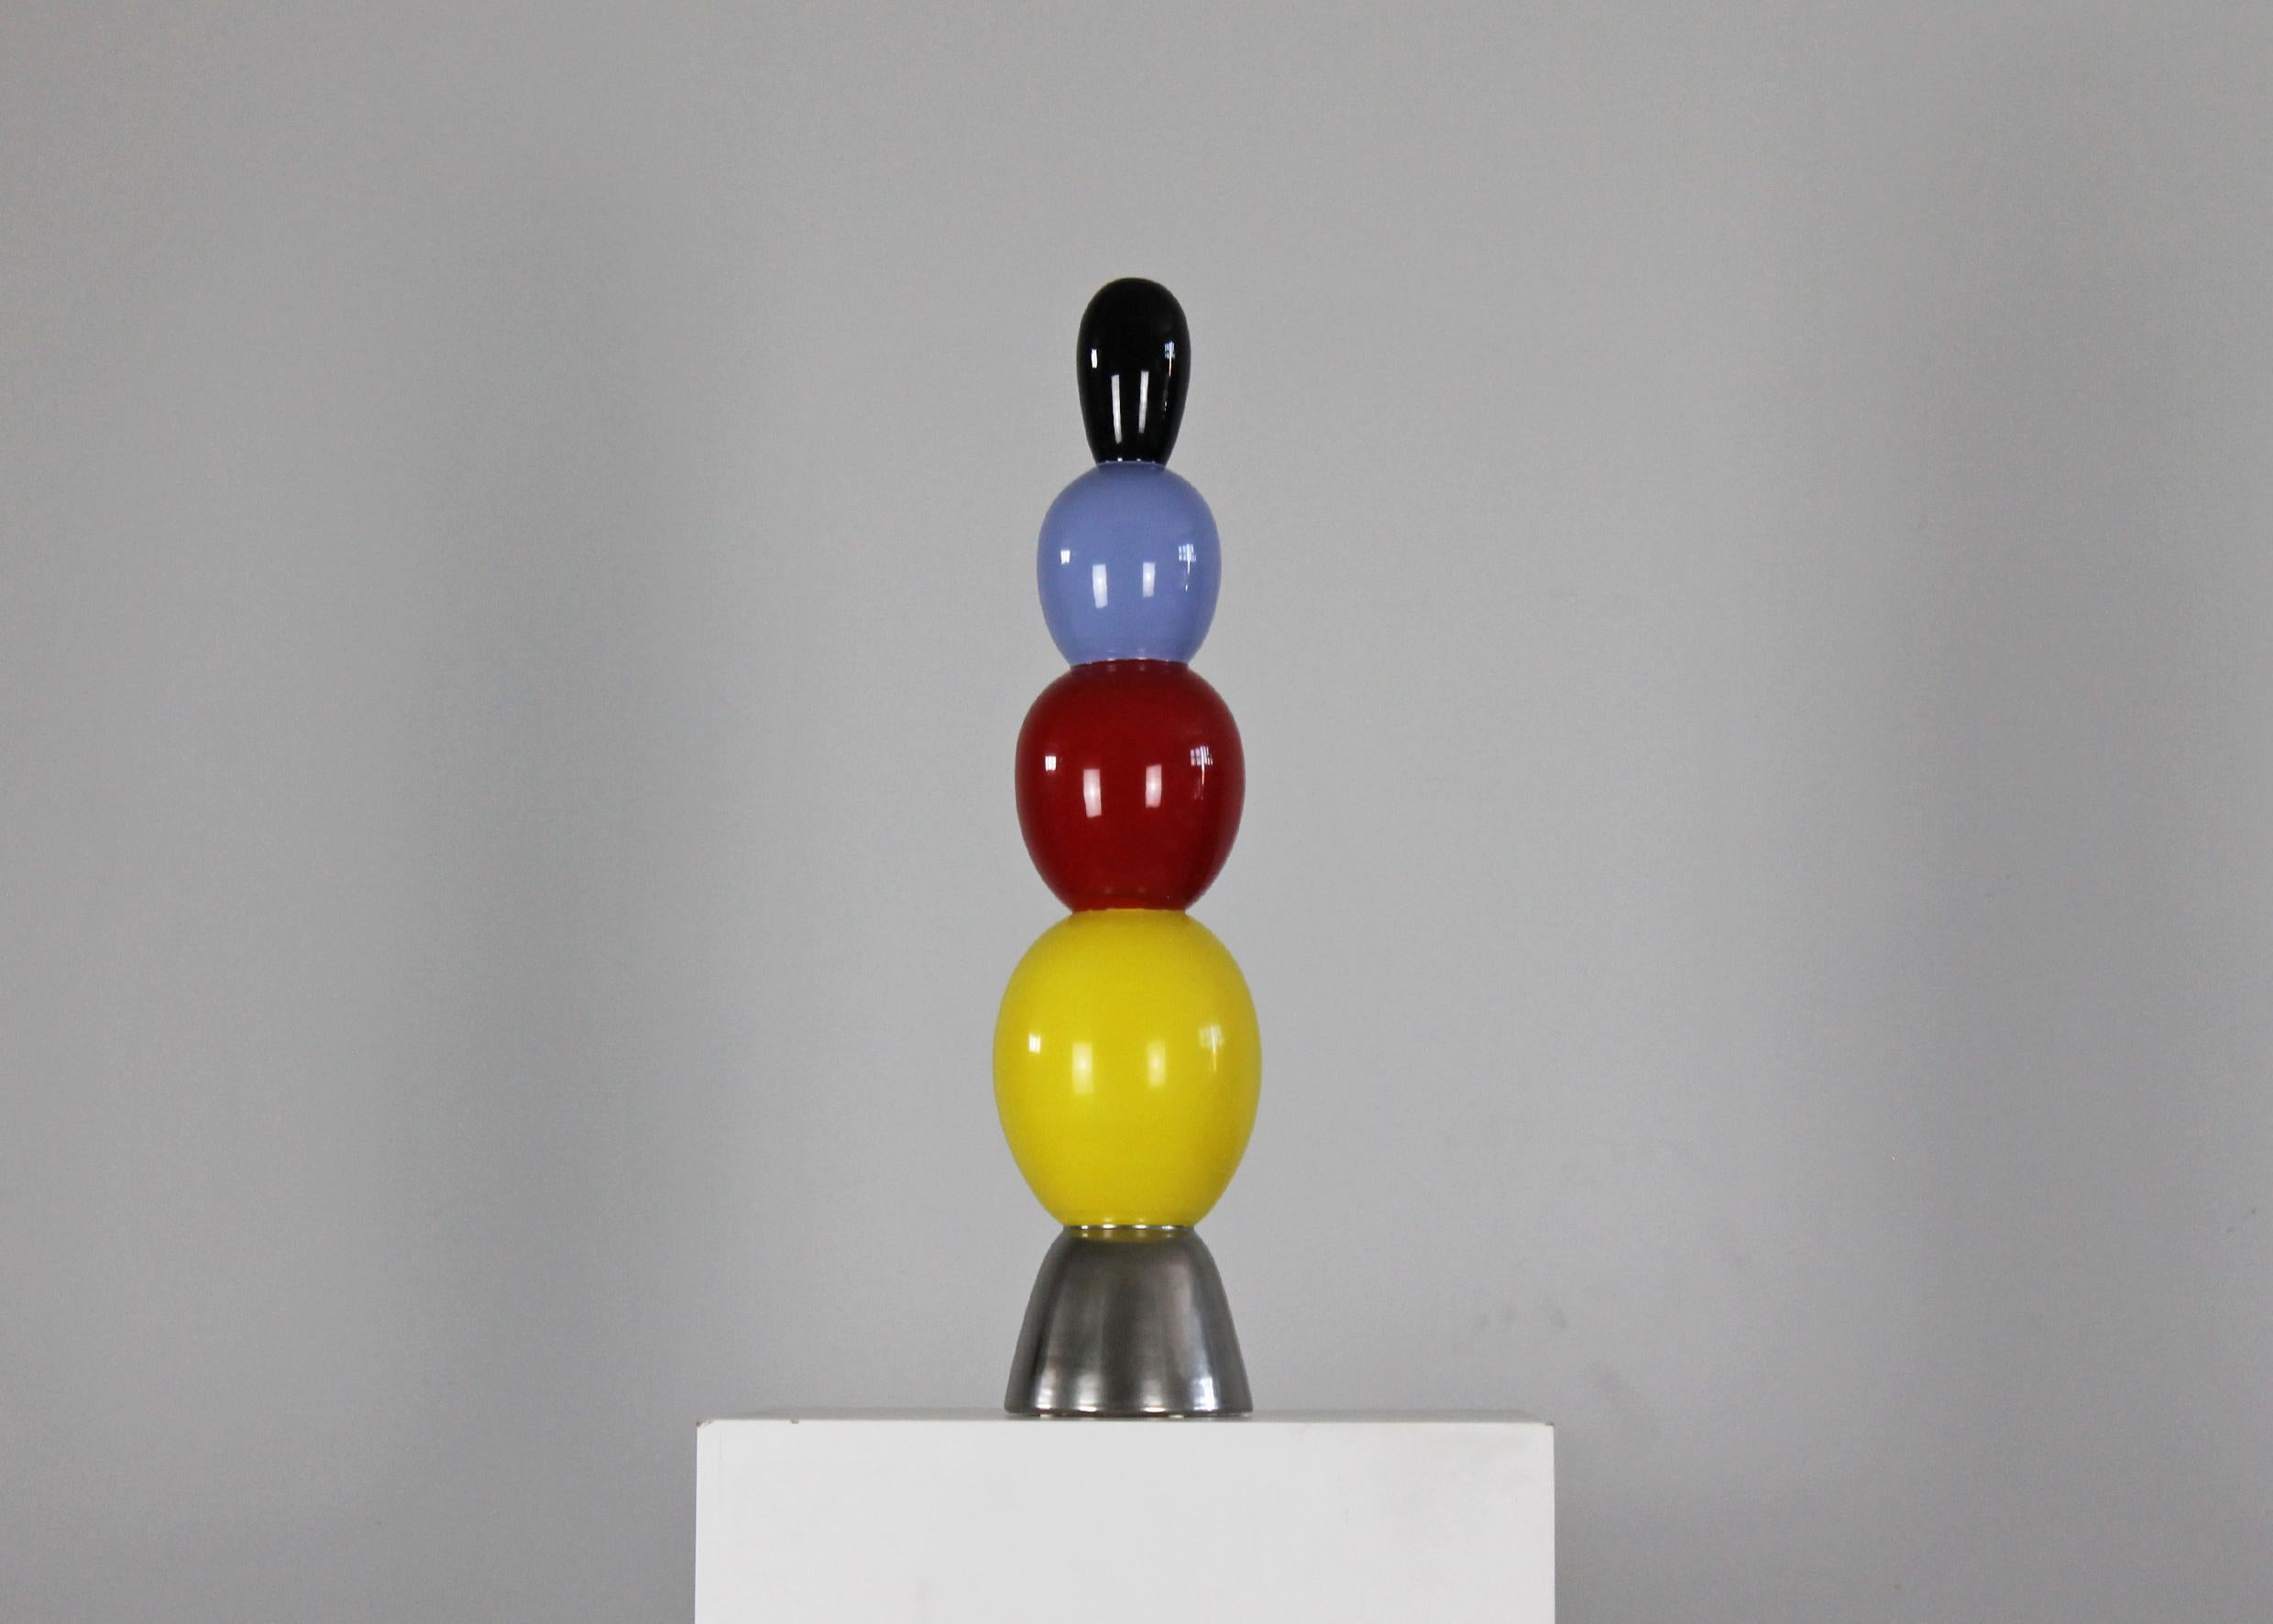 Triglifo is an elegant statuette entirely realized in ceramic as a part of a 12 columns series designed by Alessandro Mendini and produced by Superego in the early 2000s. 

The sculpture is signed and numbered under the base.

The Triglifo column